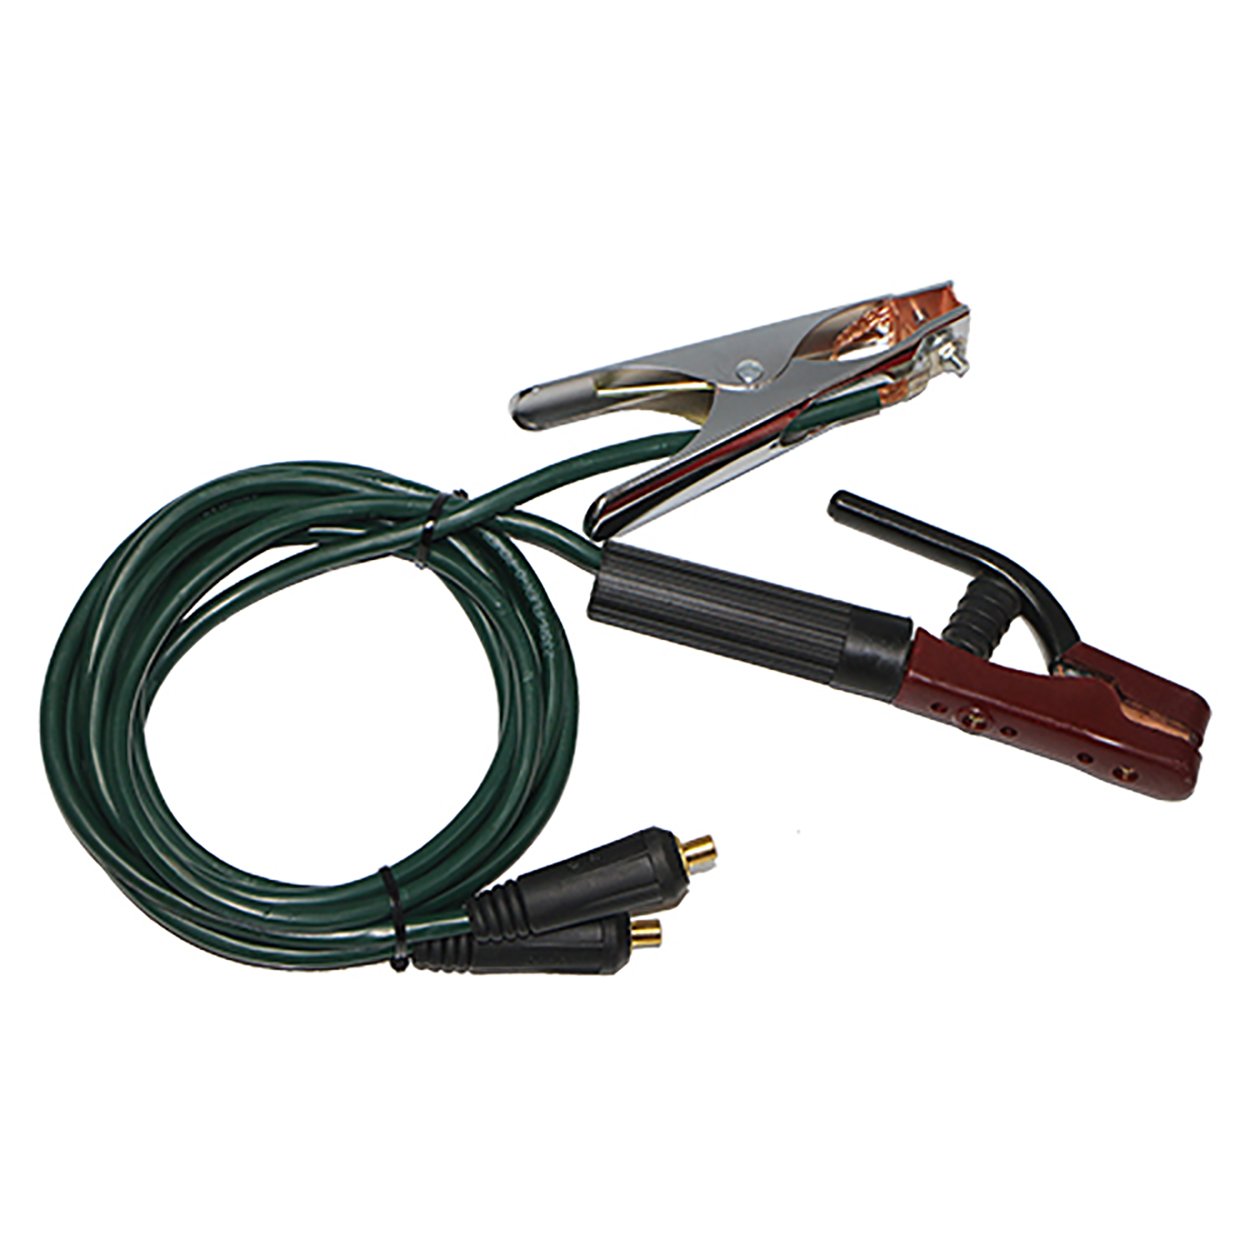 160 Amp Welding Cable Kit